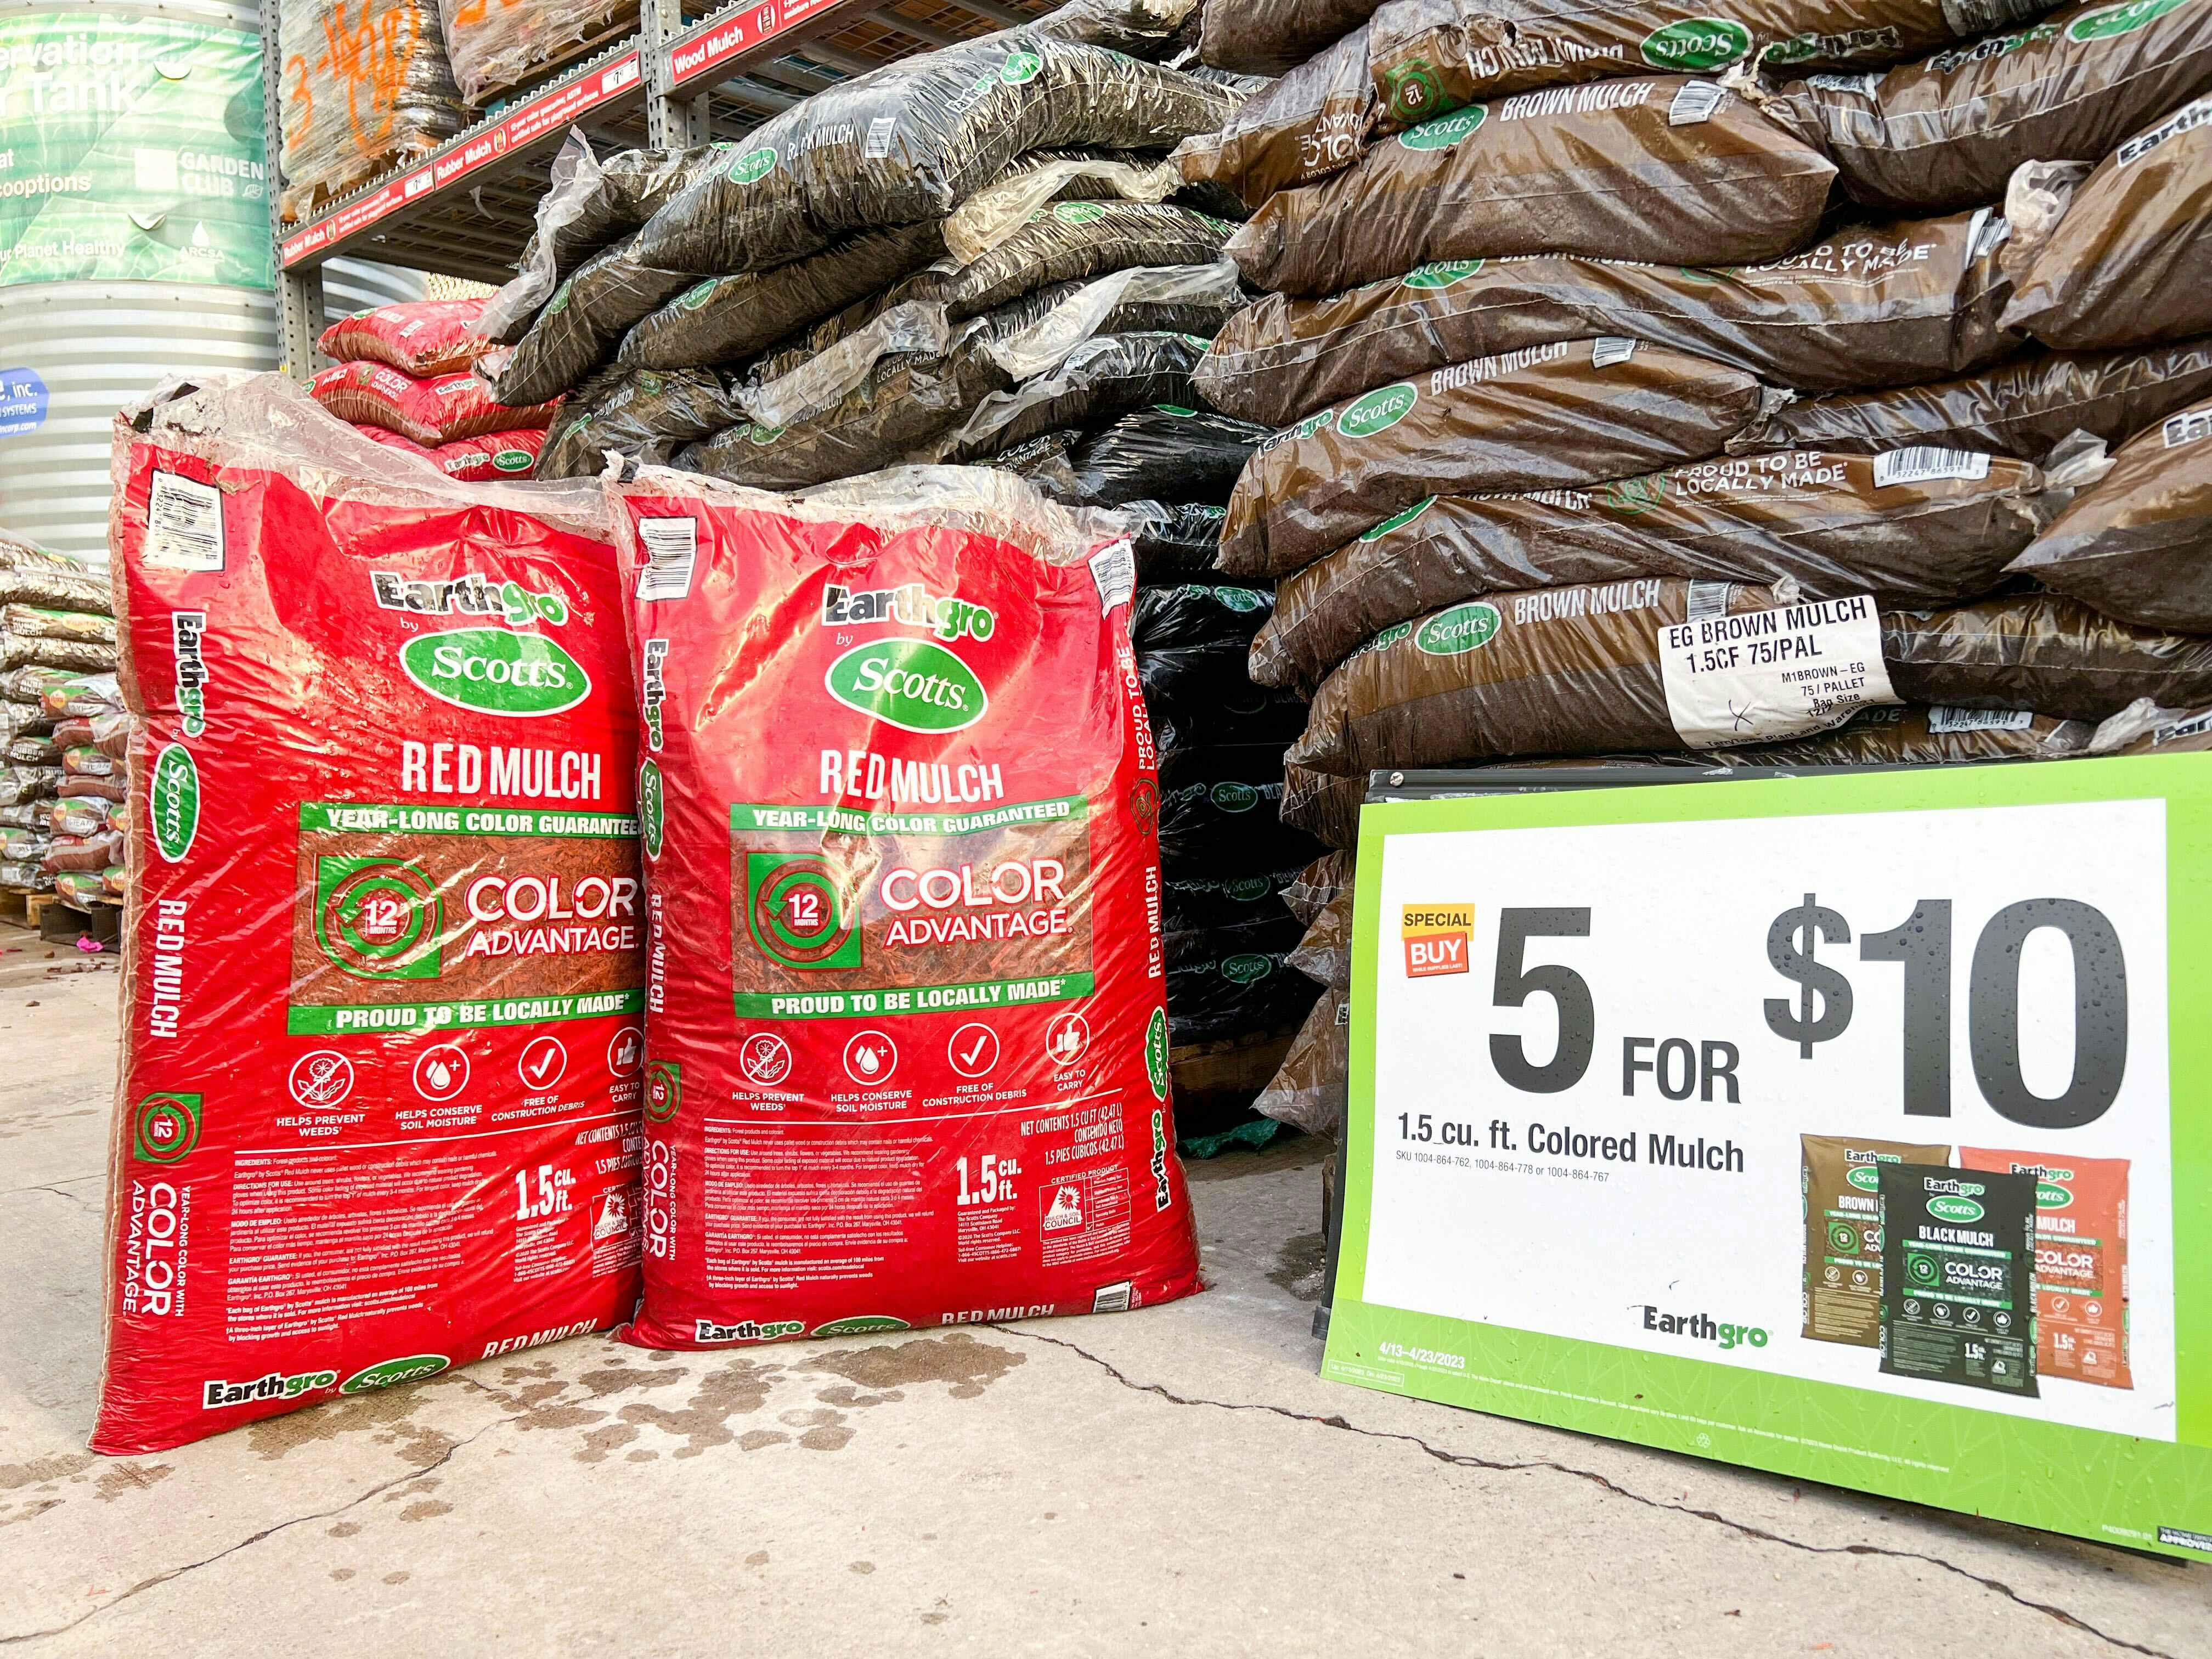 bags of home depot colored mulch with sign showing five for $10